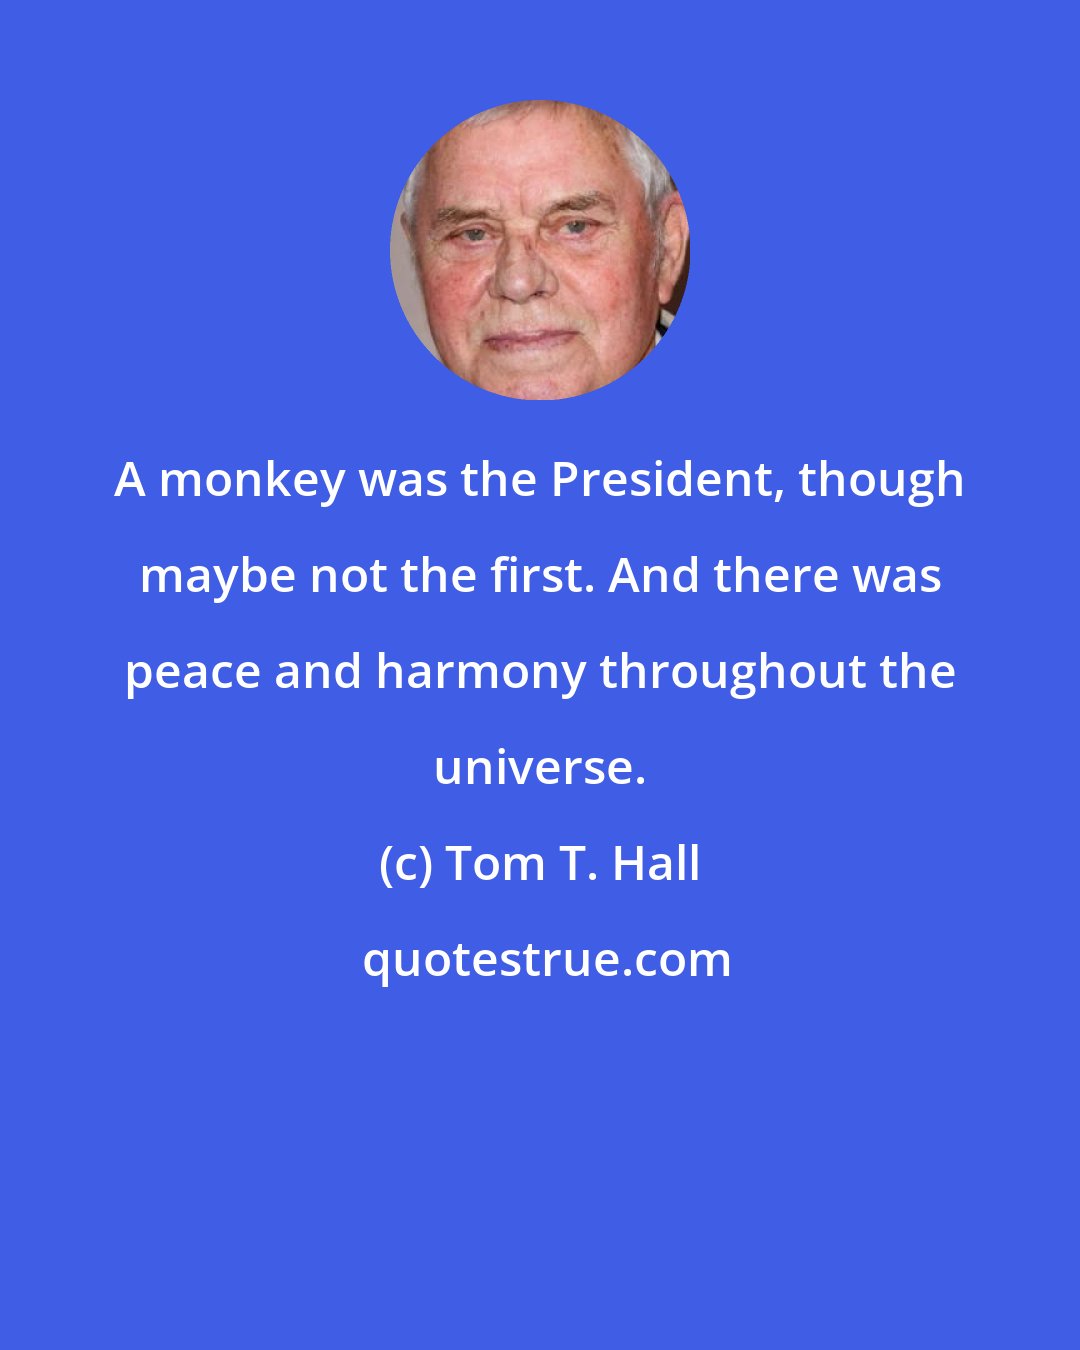 Tom T. Hall: A monkey was the President, though maybe not the first. And there was peace and harmony throughout the universe.